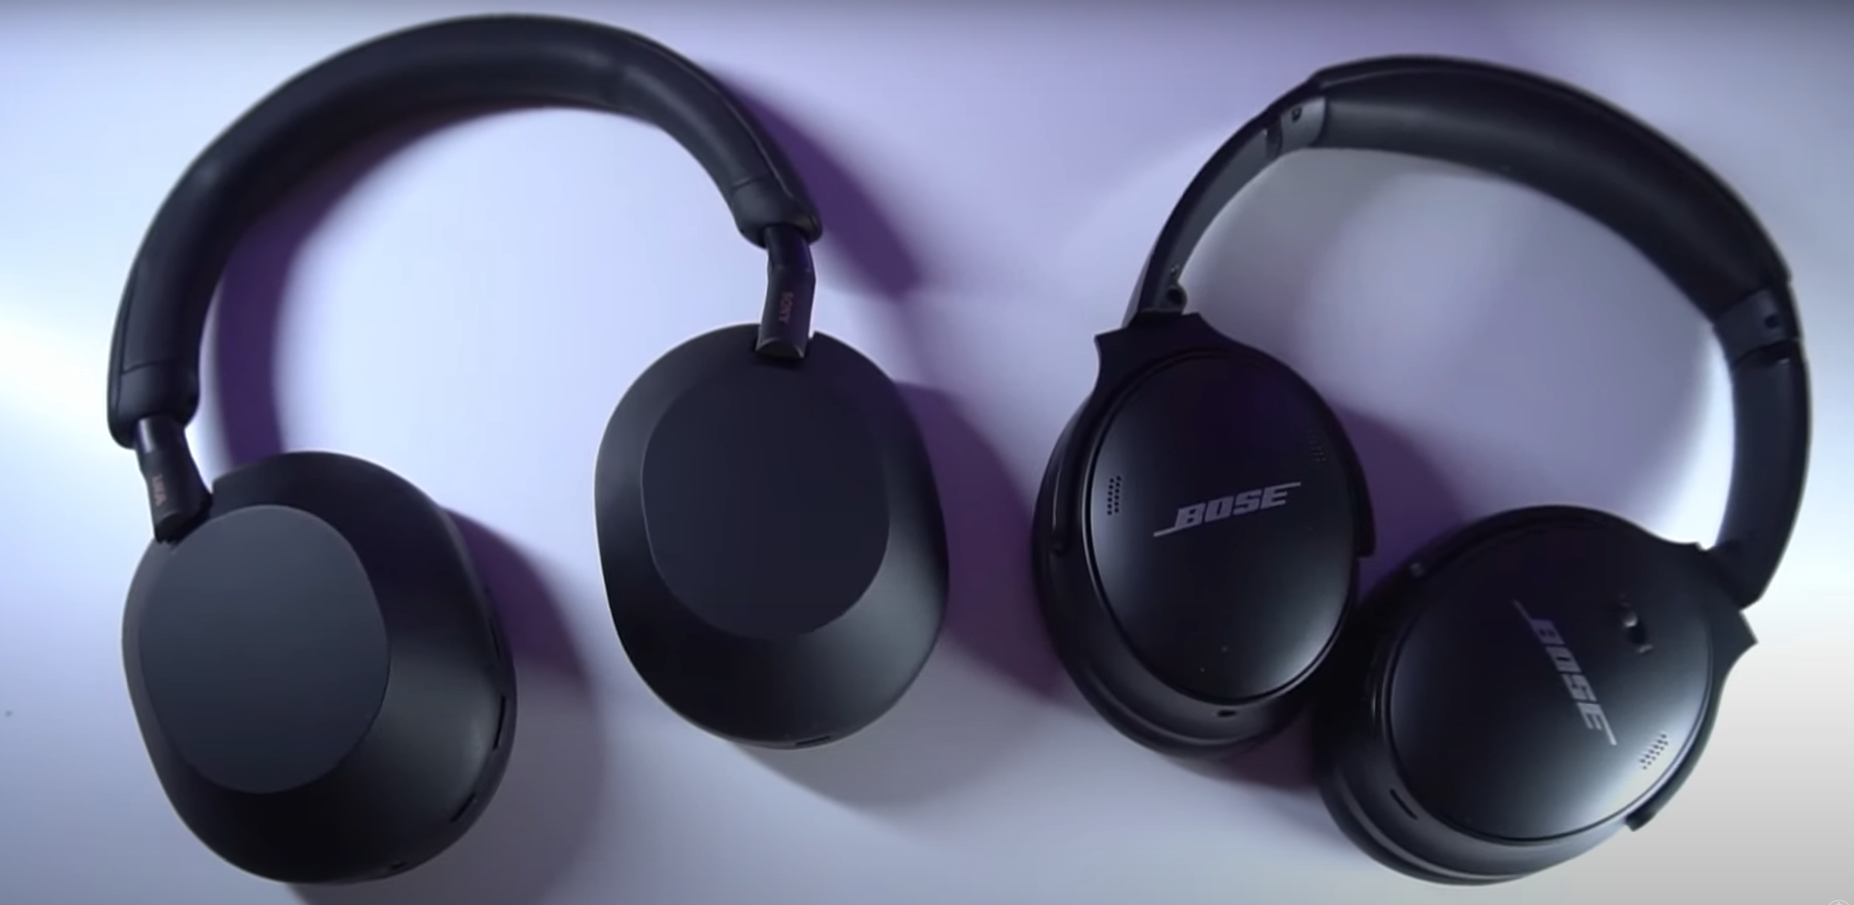 Bose QuietComfort 45 vs Bose QuietComfort SE: What is the difference?